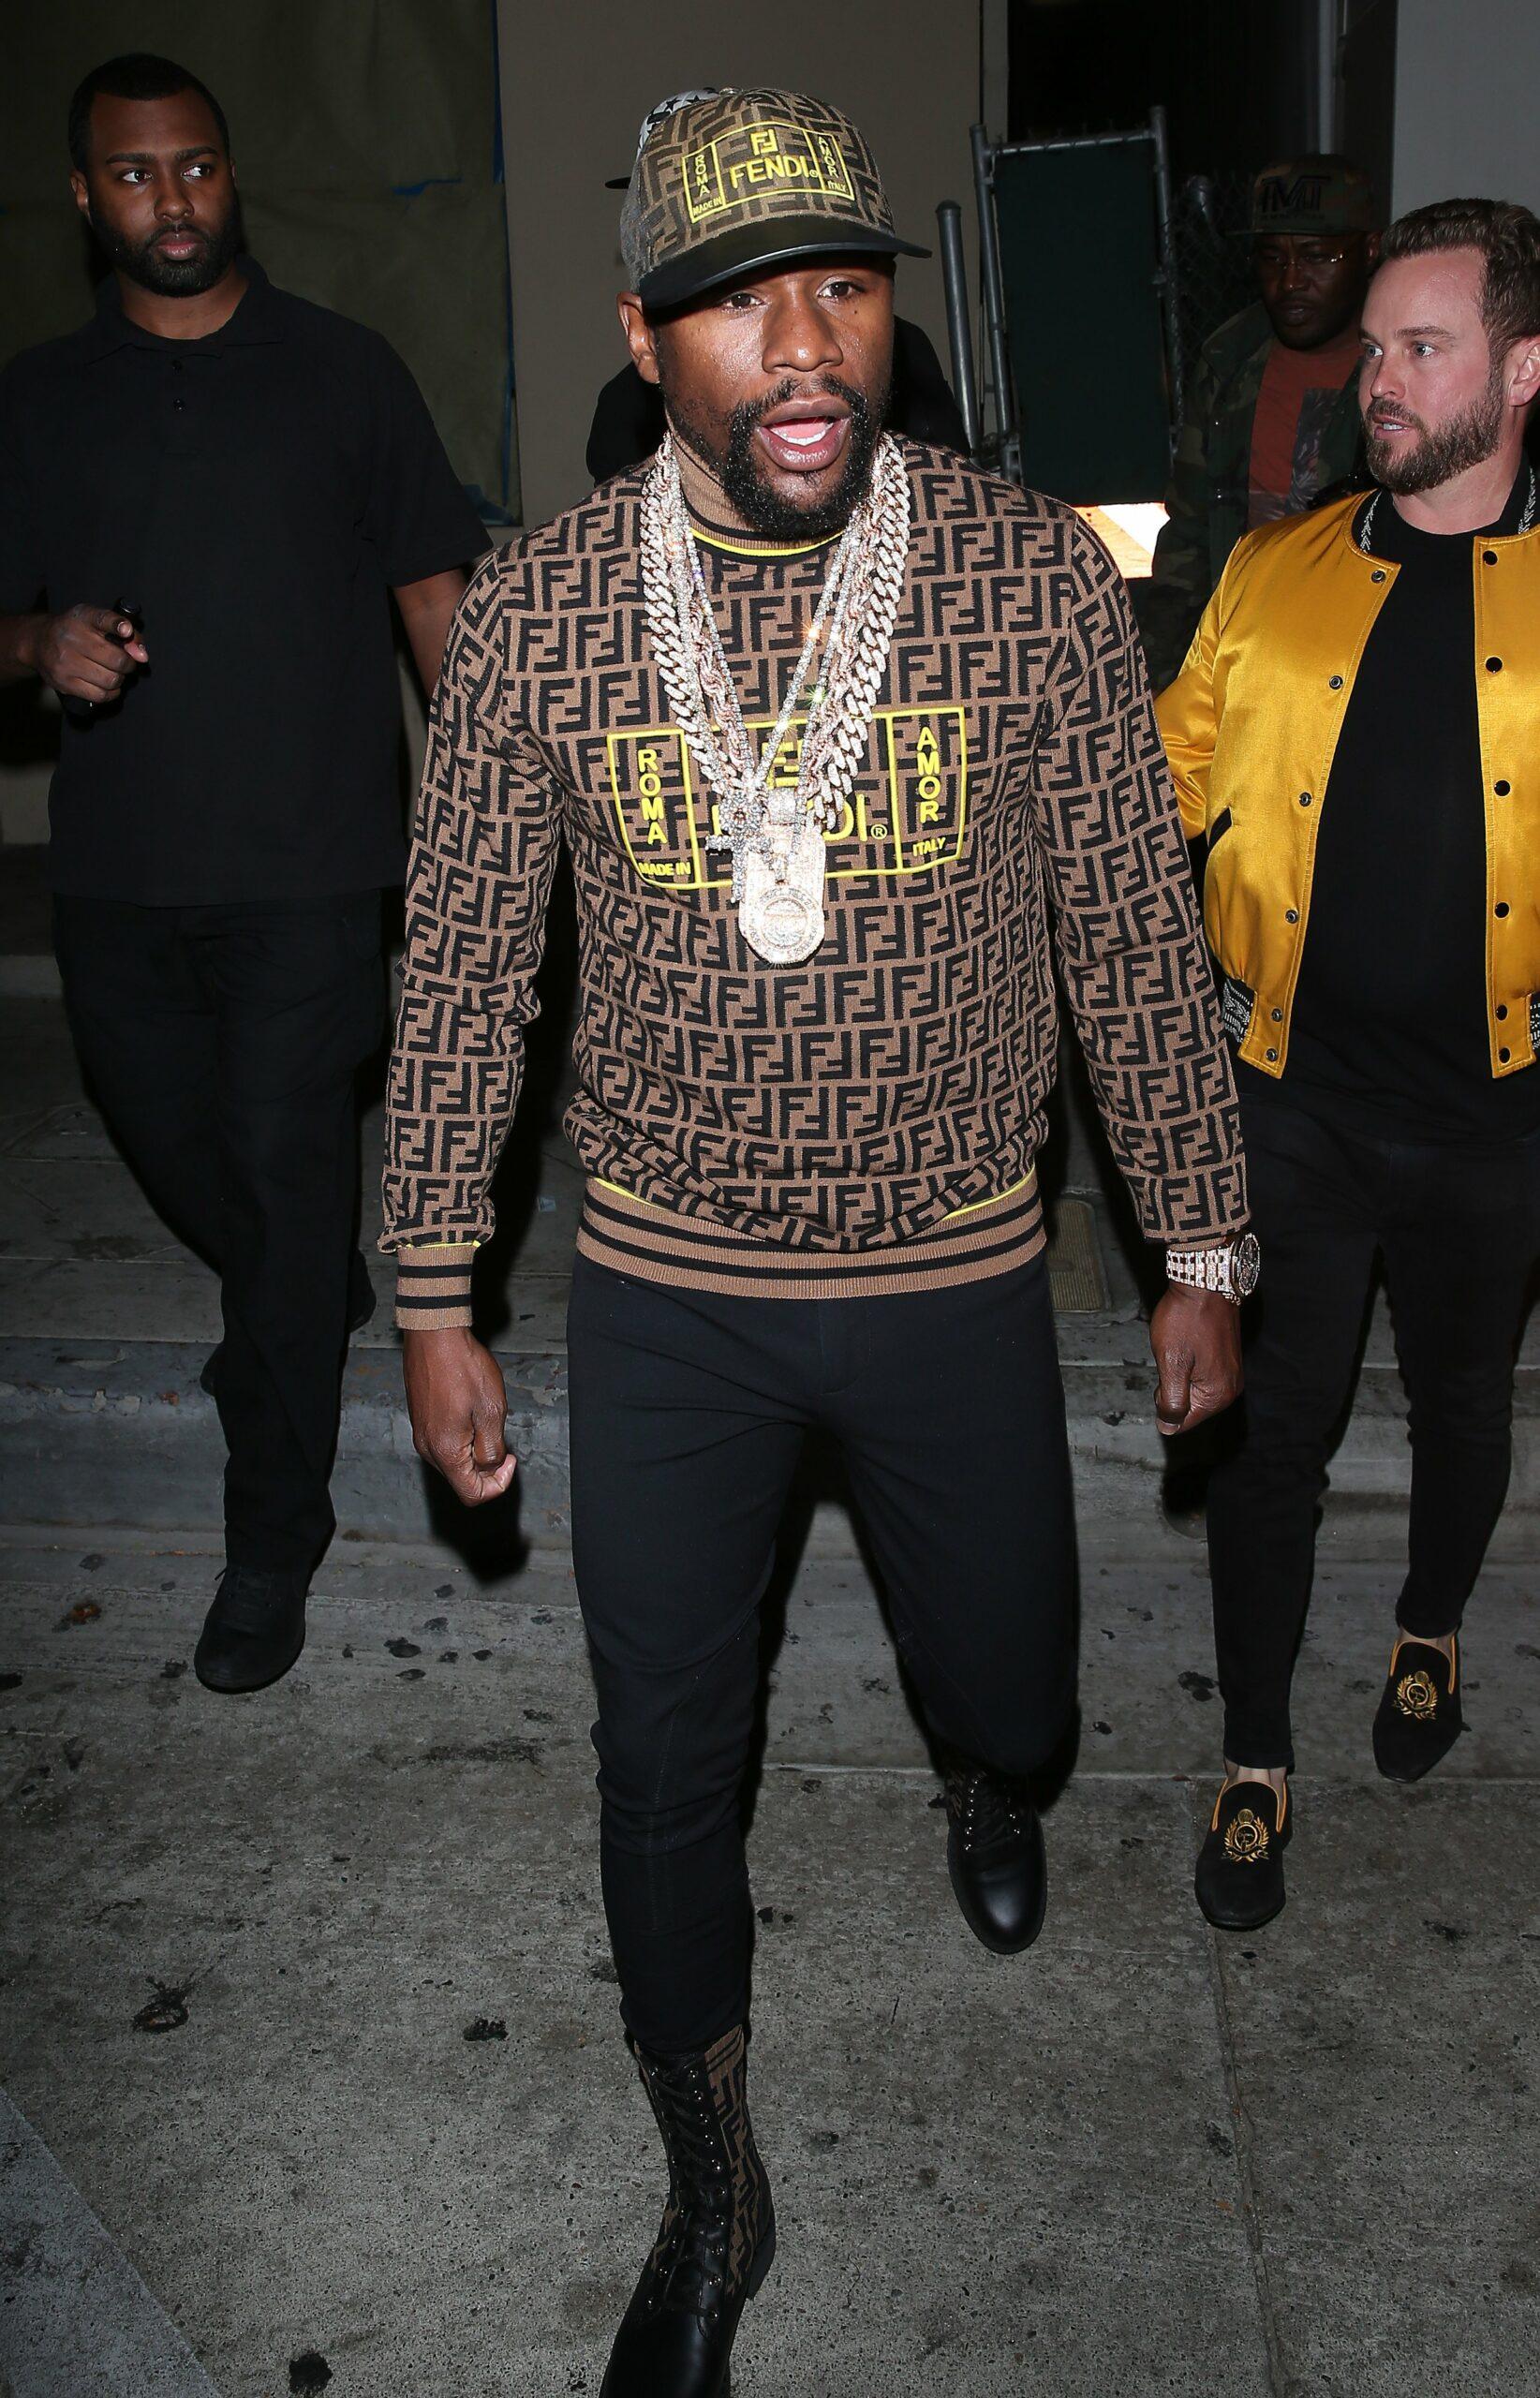 Floyd Mayweather dripping in designer clothes and Gold Chains was seen leaving dinner at 'Catch' Restaurant in West Hollywood, CA